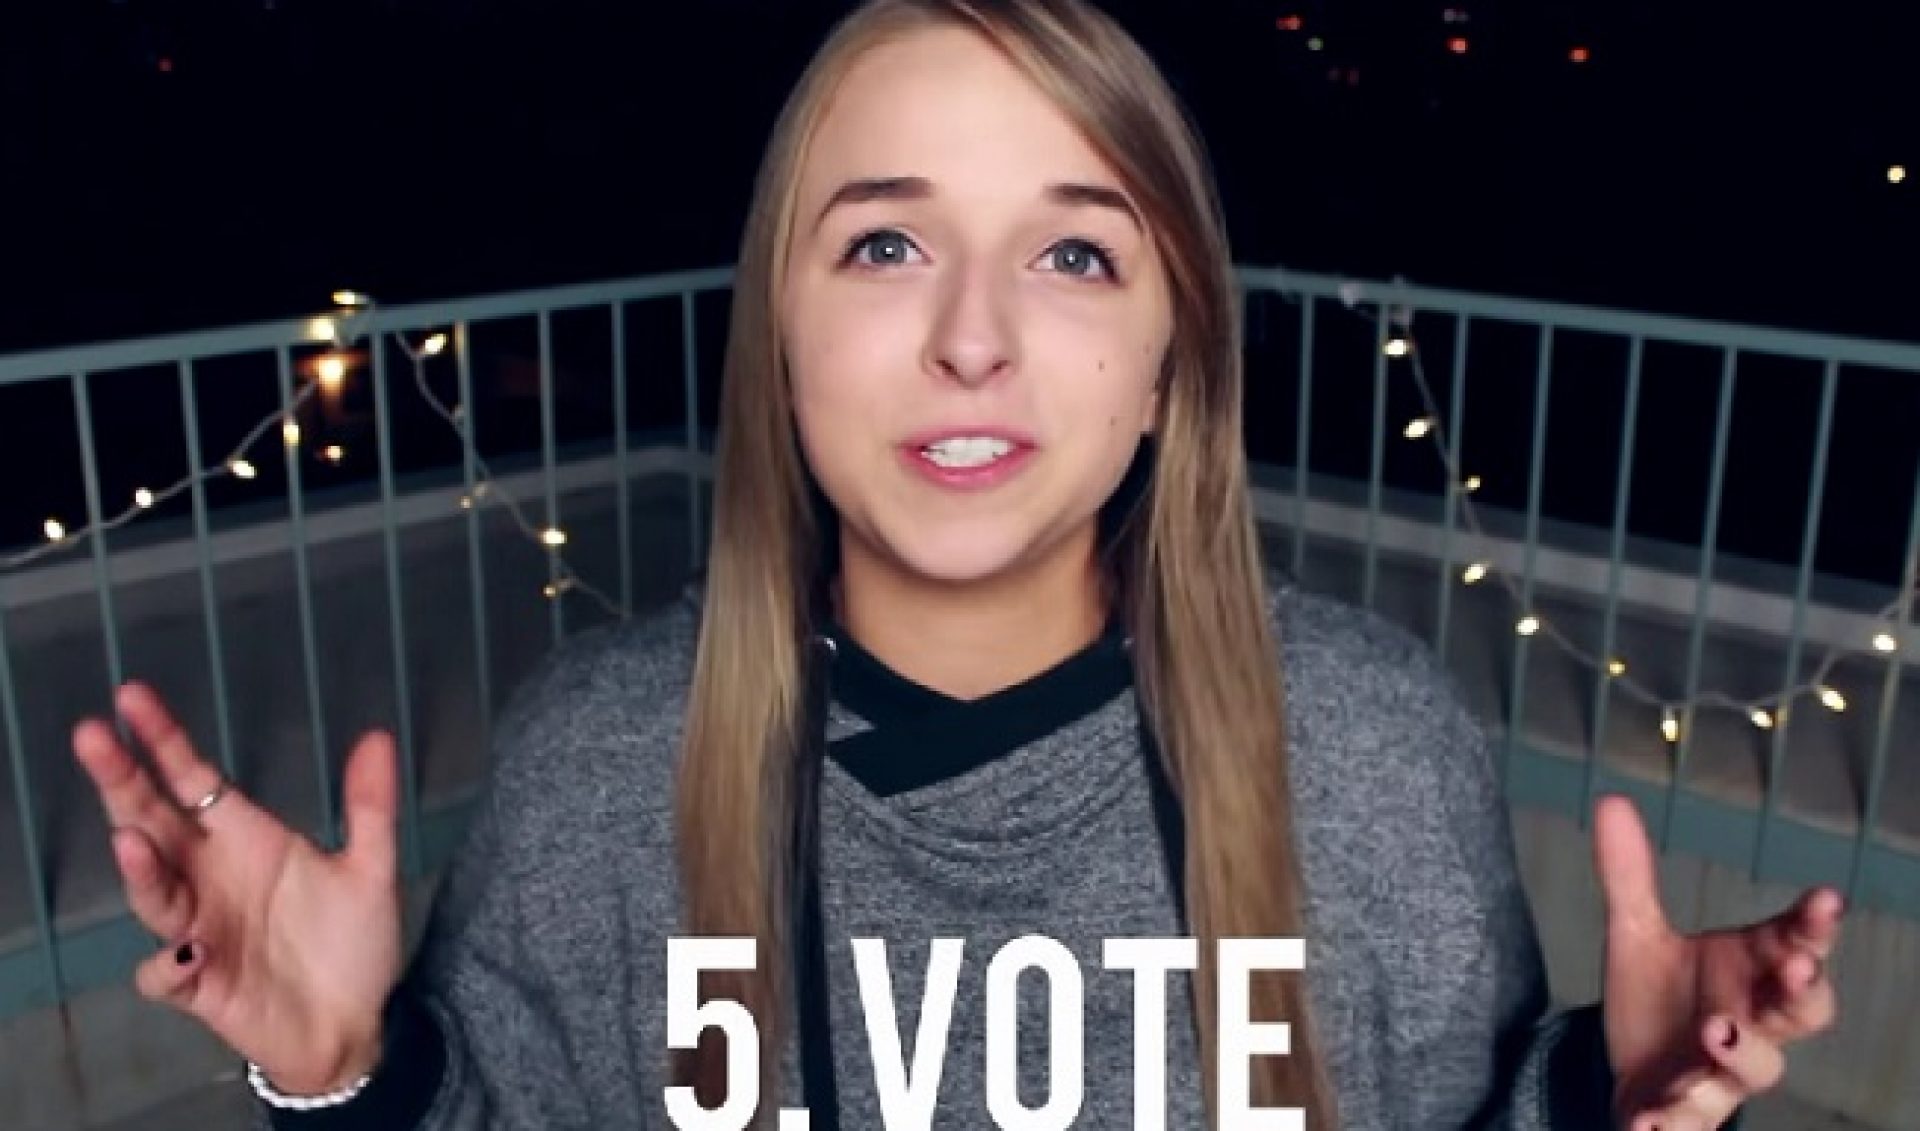 JennXPenn Partners With OurTime.Org, Encourages 18-Year-Olds To Vote